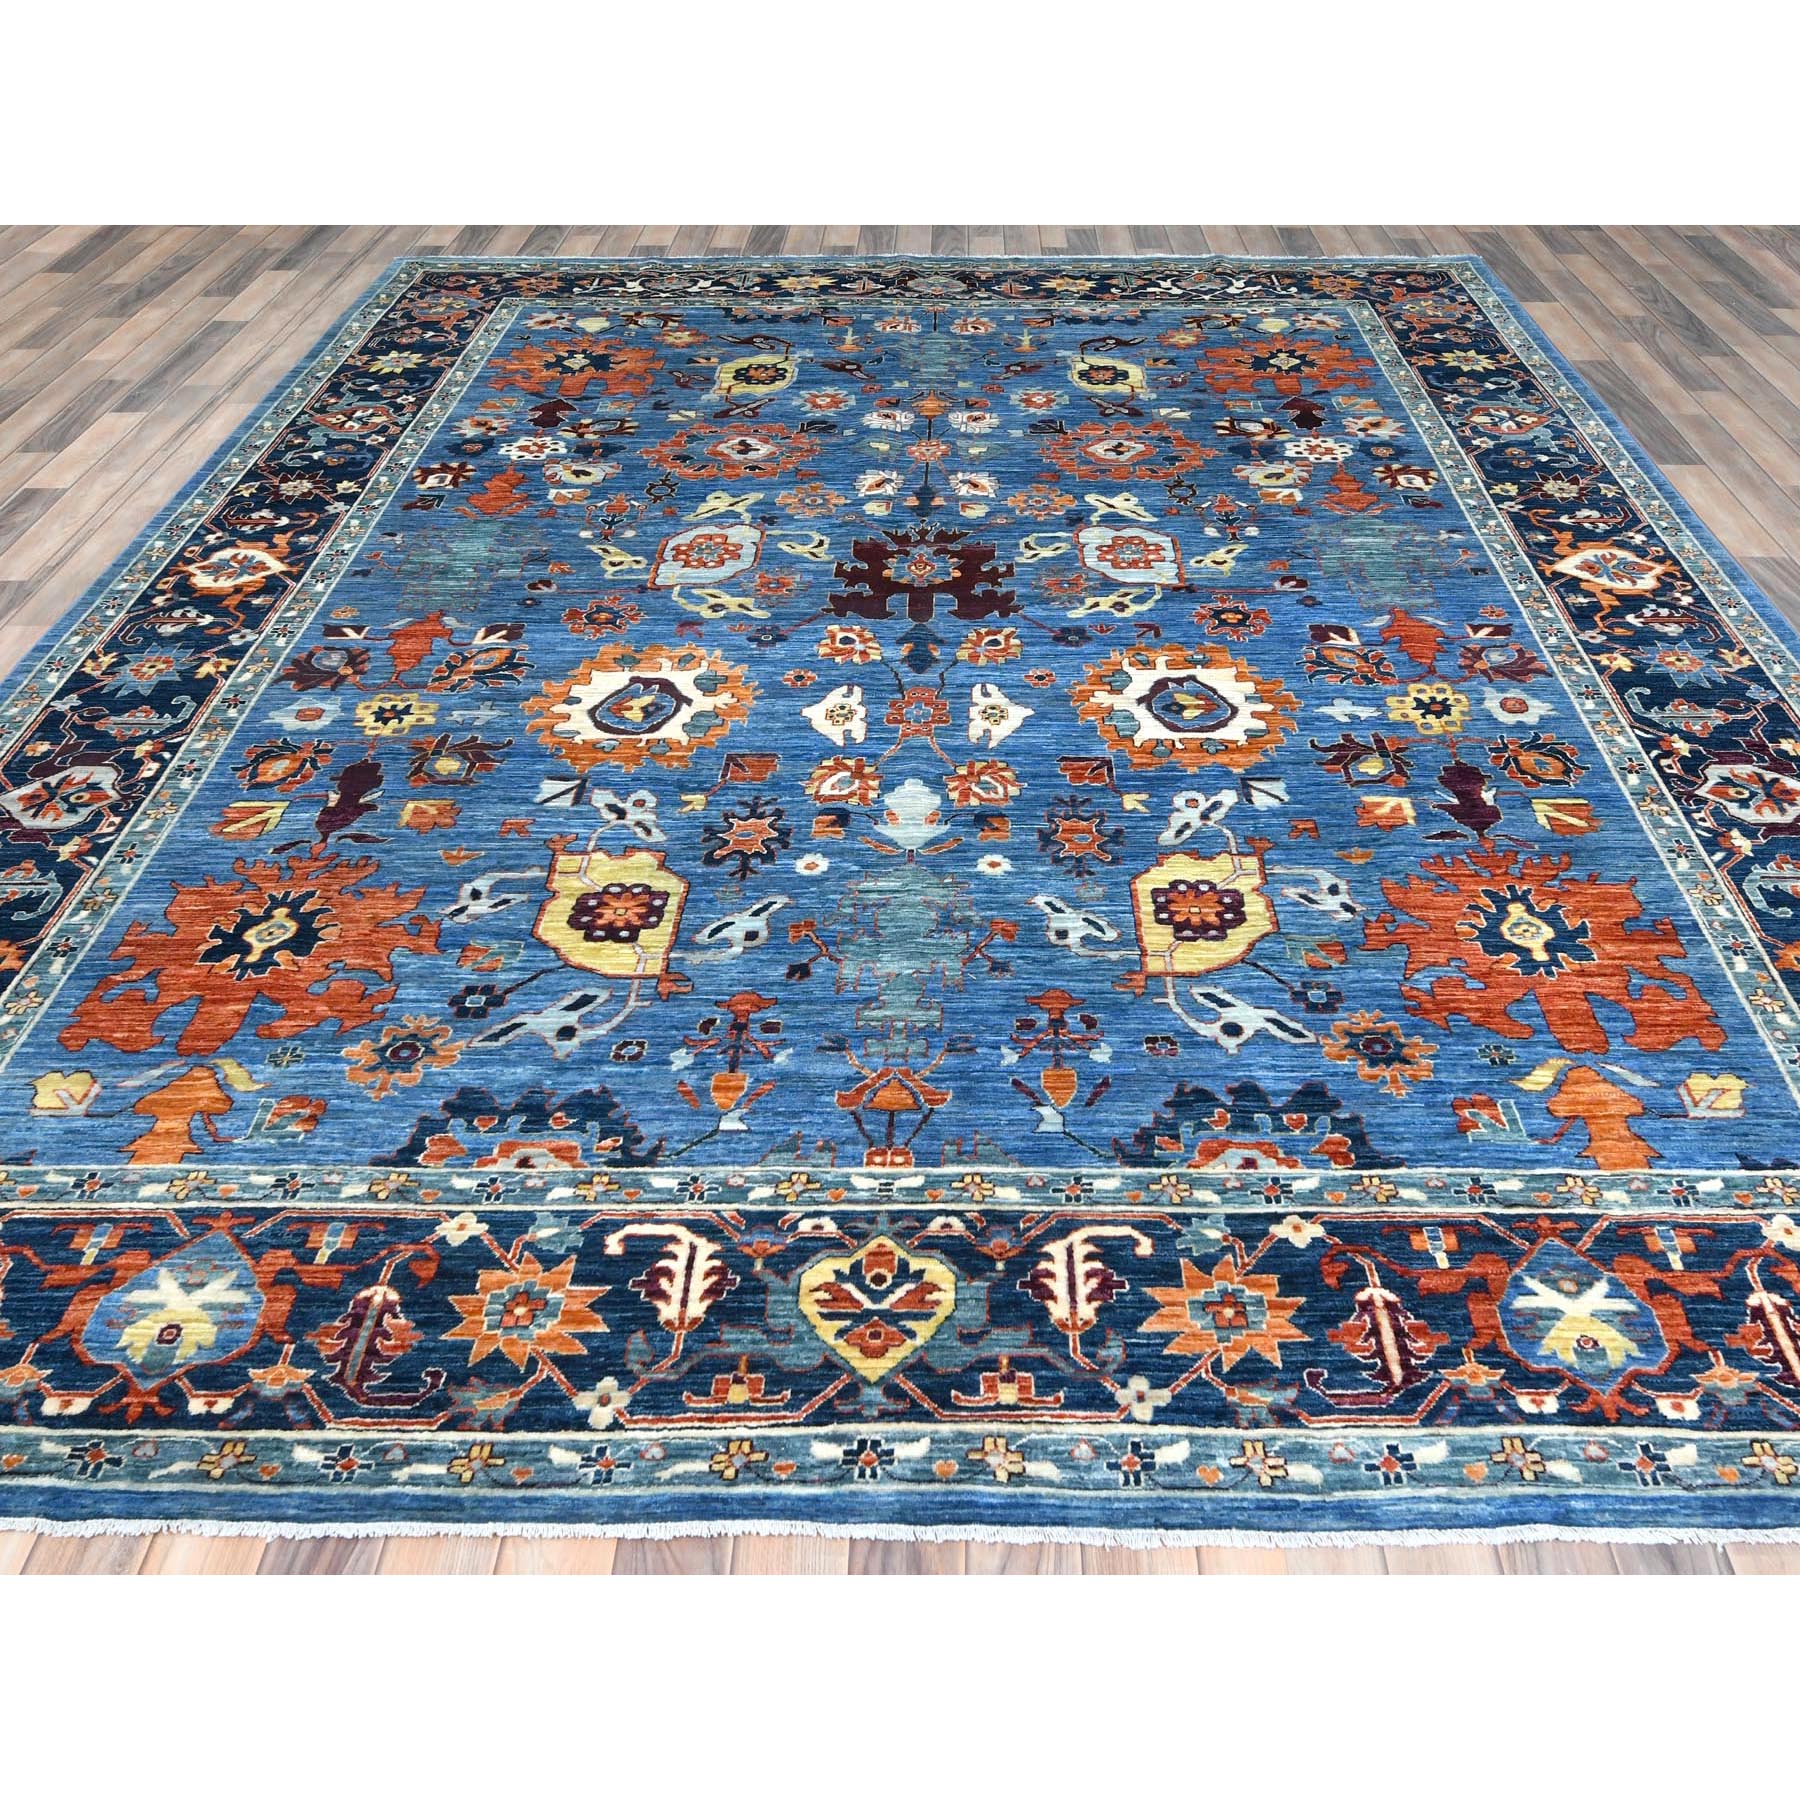 9'2"x11'9" Sapphire Blue, Armenian Inspired Caucasian Design 200 KPSI, Natural Dyes Densely Woven, Pure Wool Hand Woven, Oriental Rug 